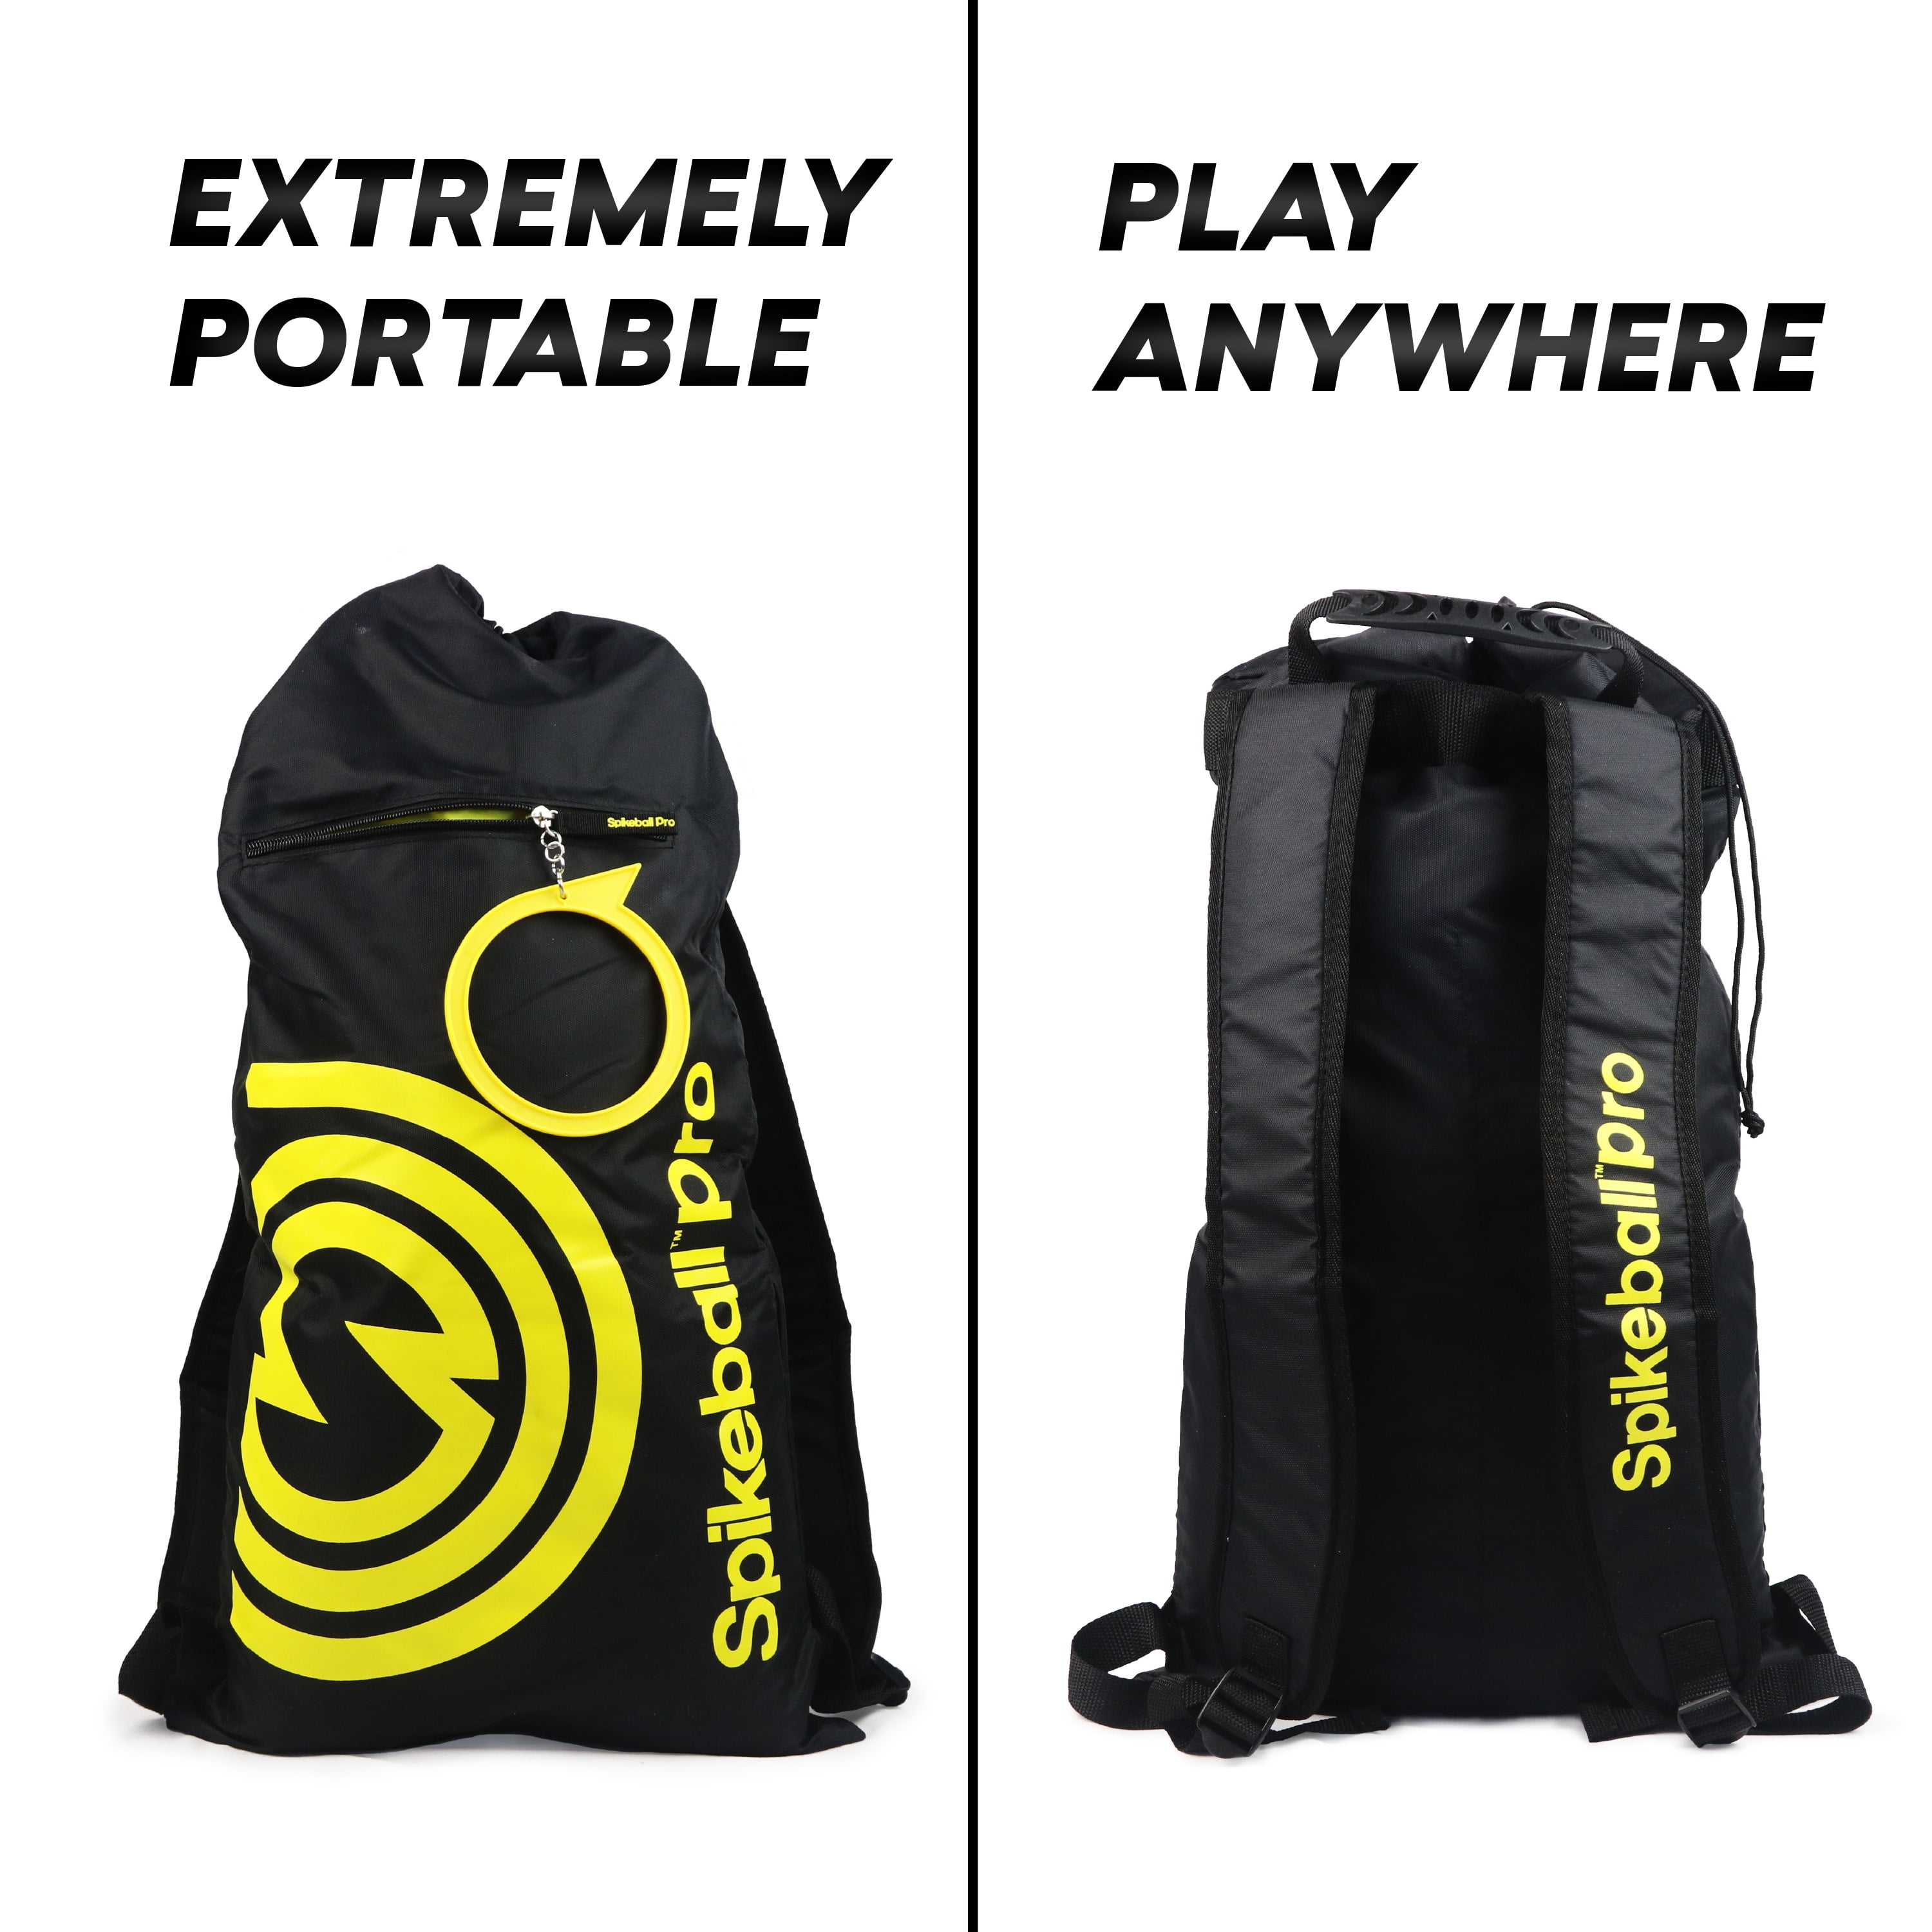 Pro Kit outdoor game Spikebuoy Spikeball 